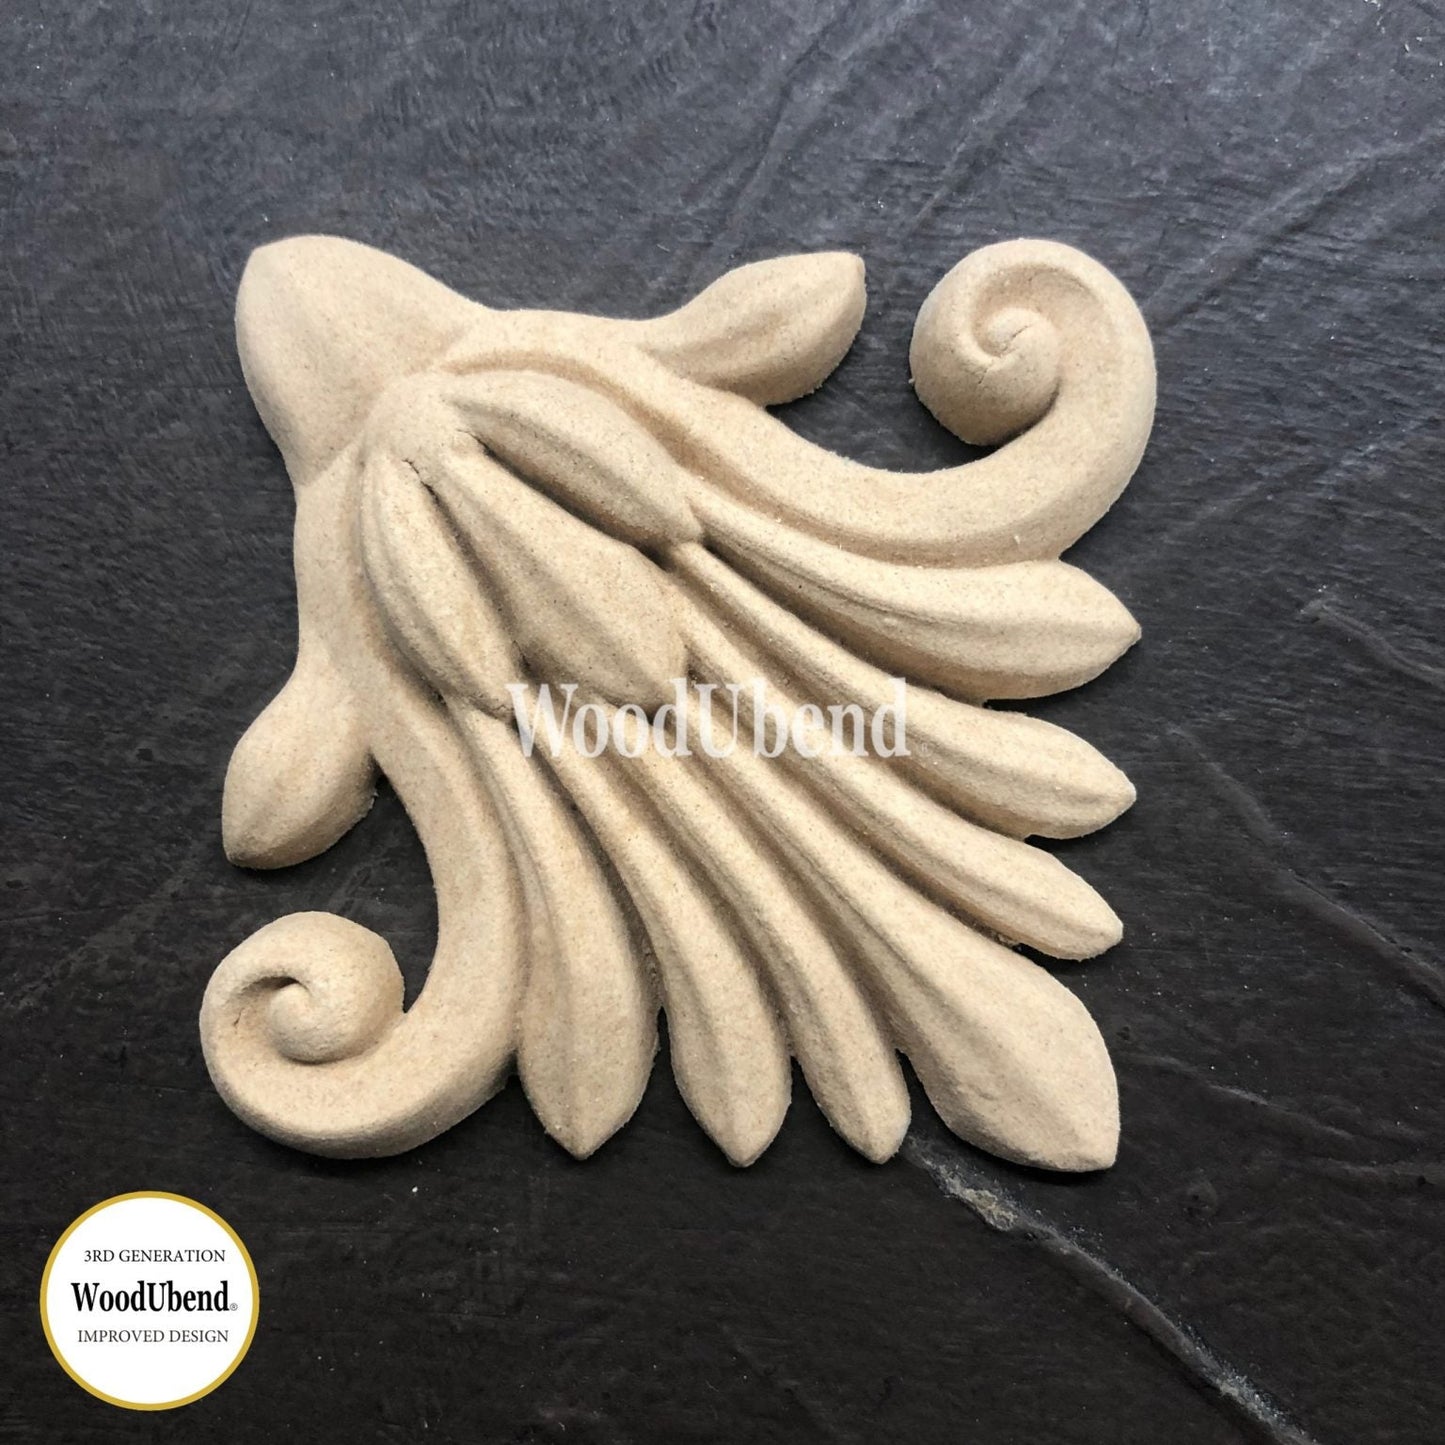 Woodubend one piece only bendable moulding X1007